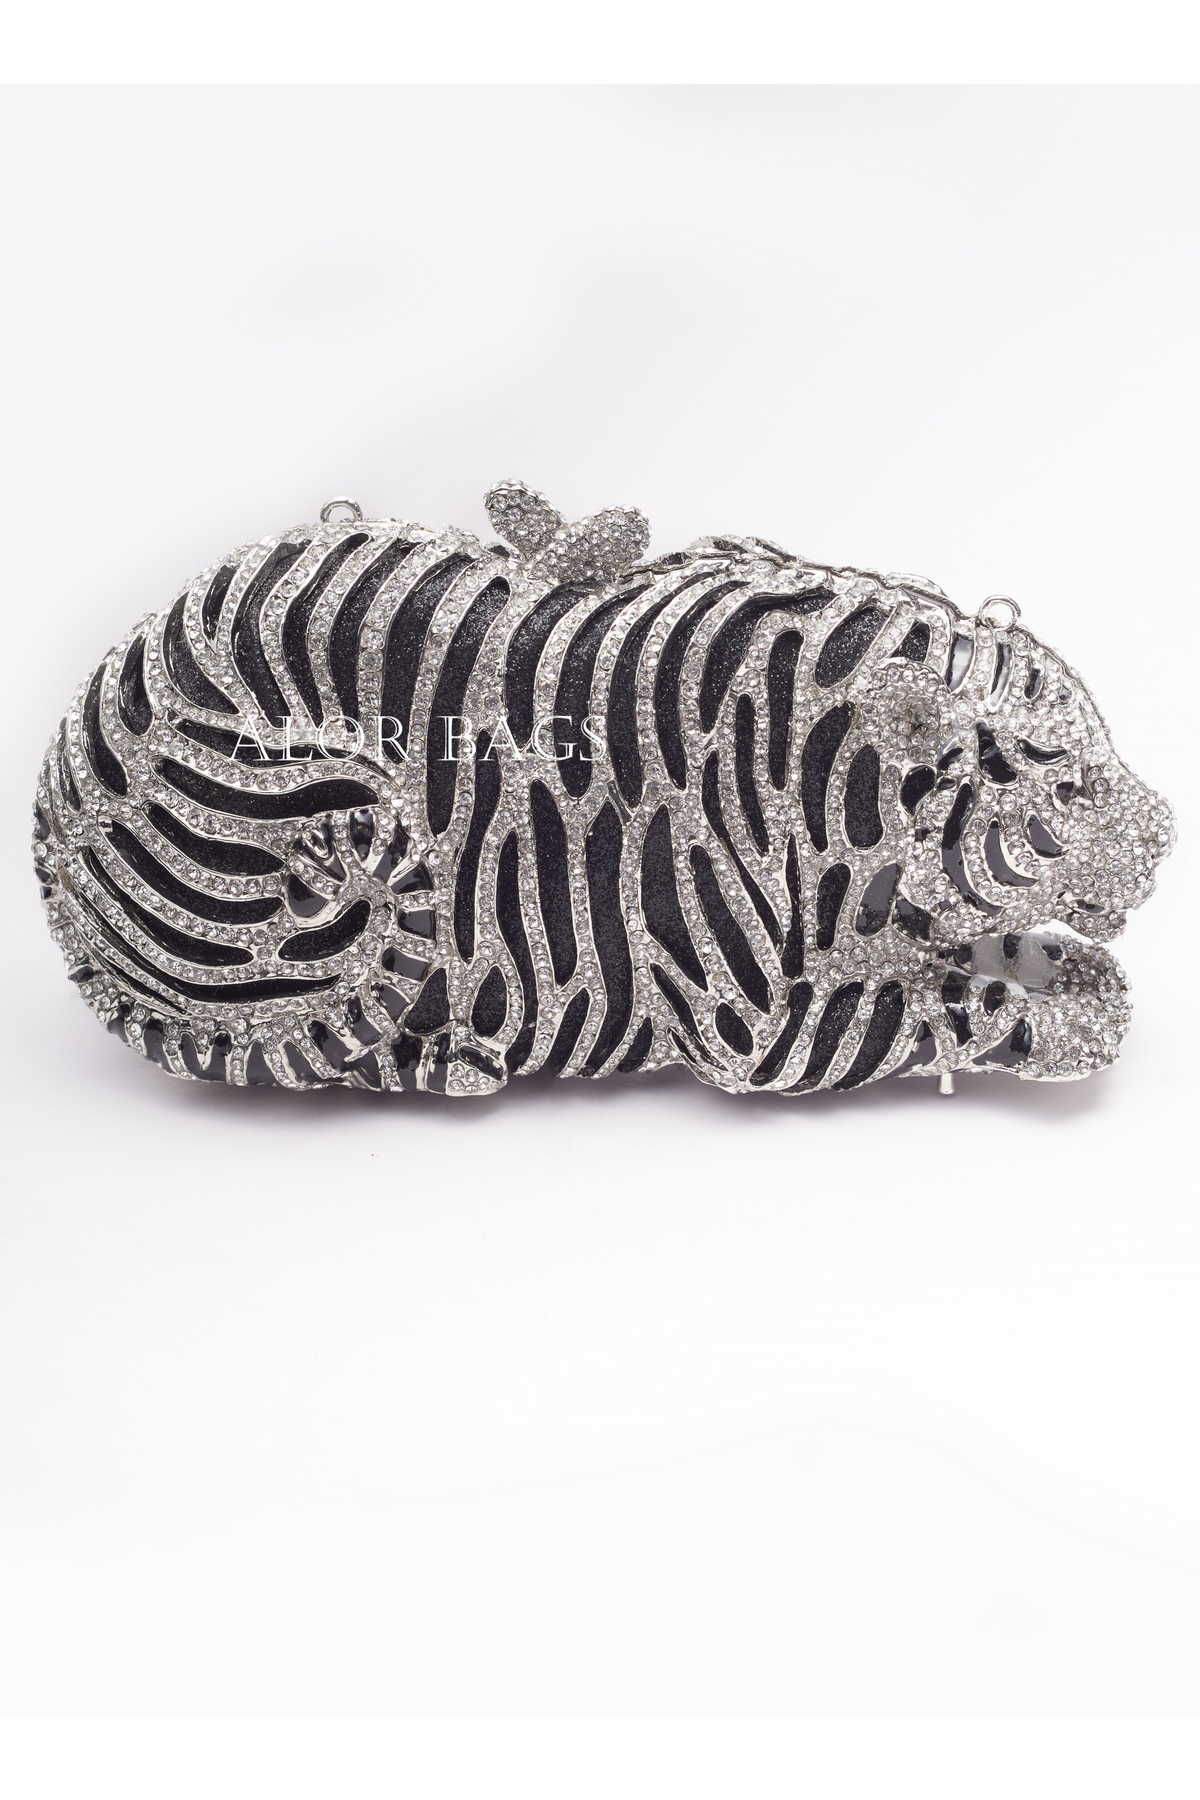 The Silver Tiger Clutch